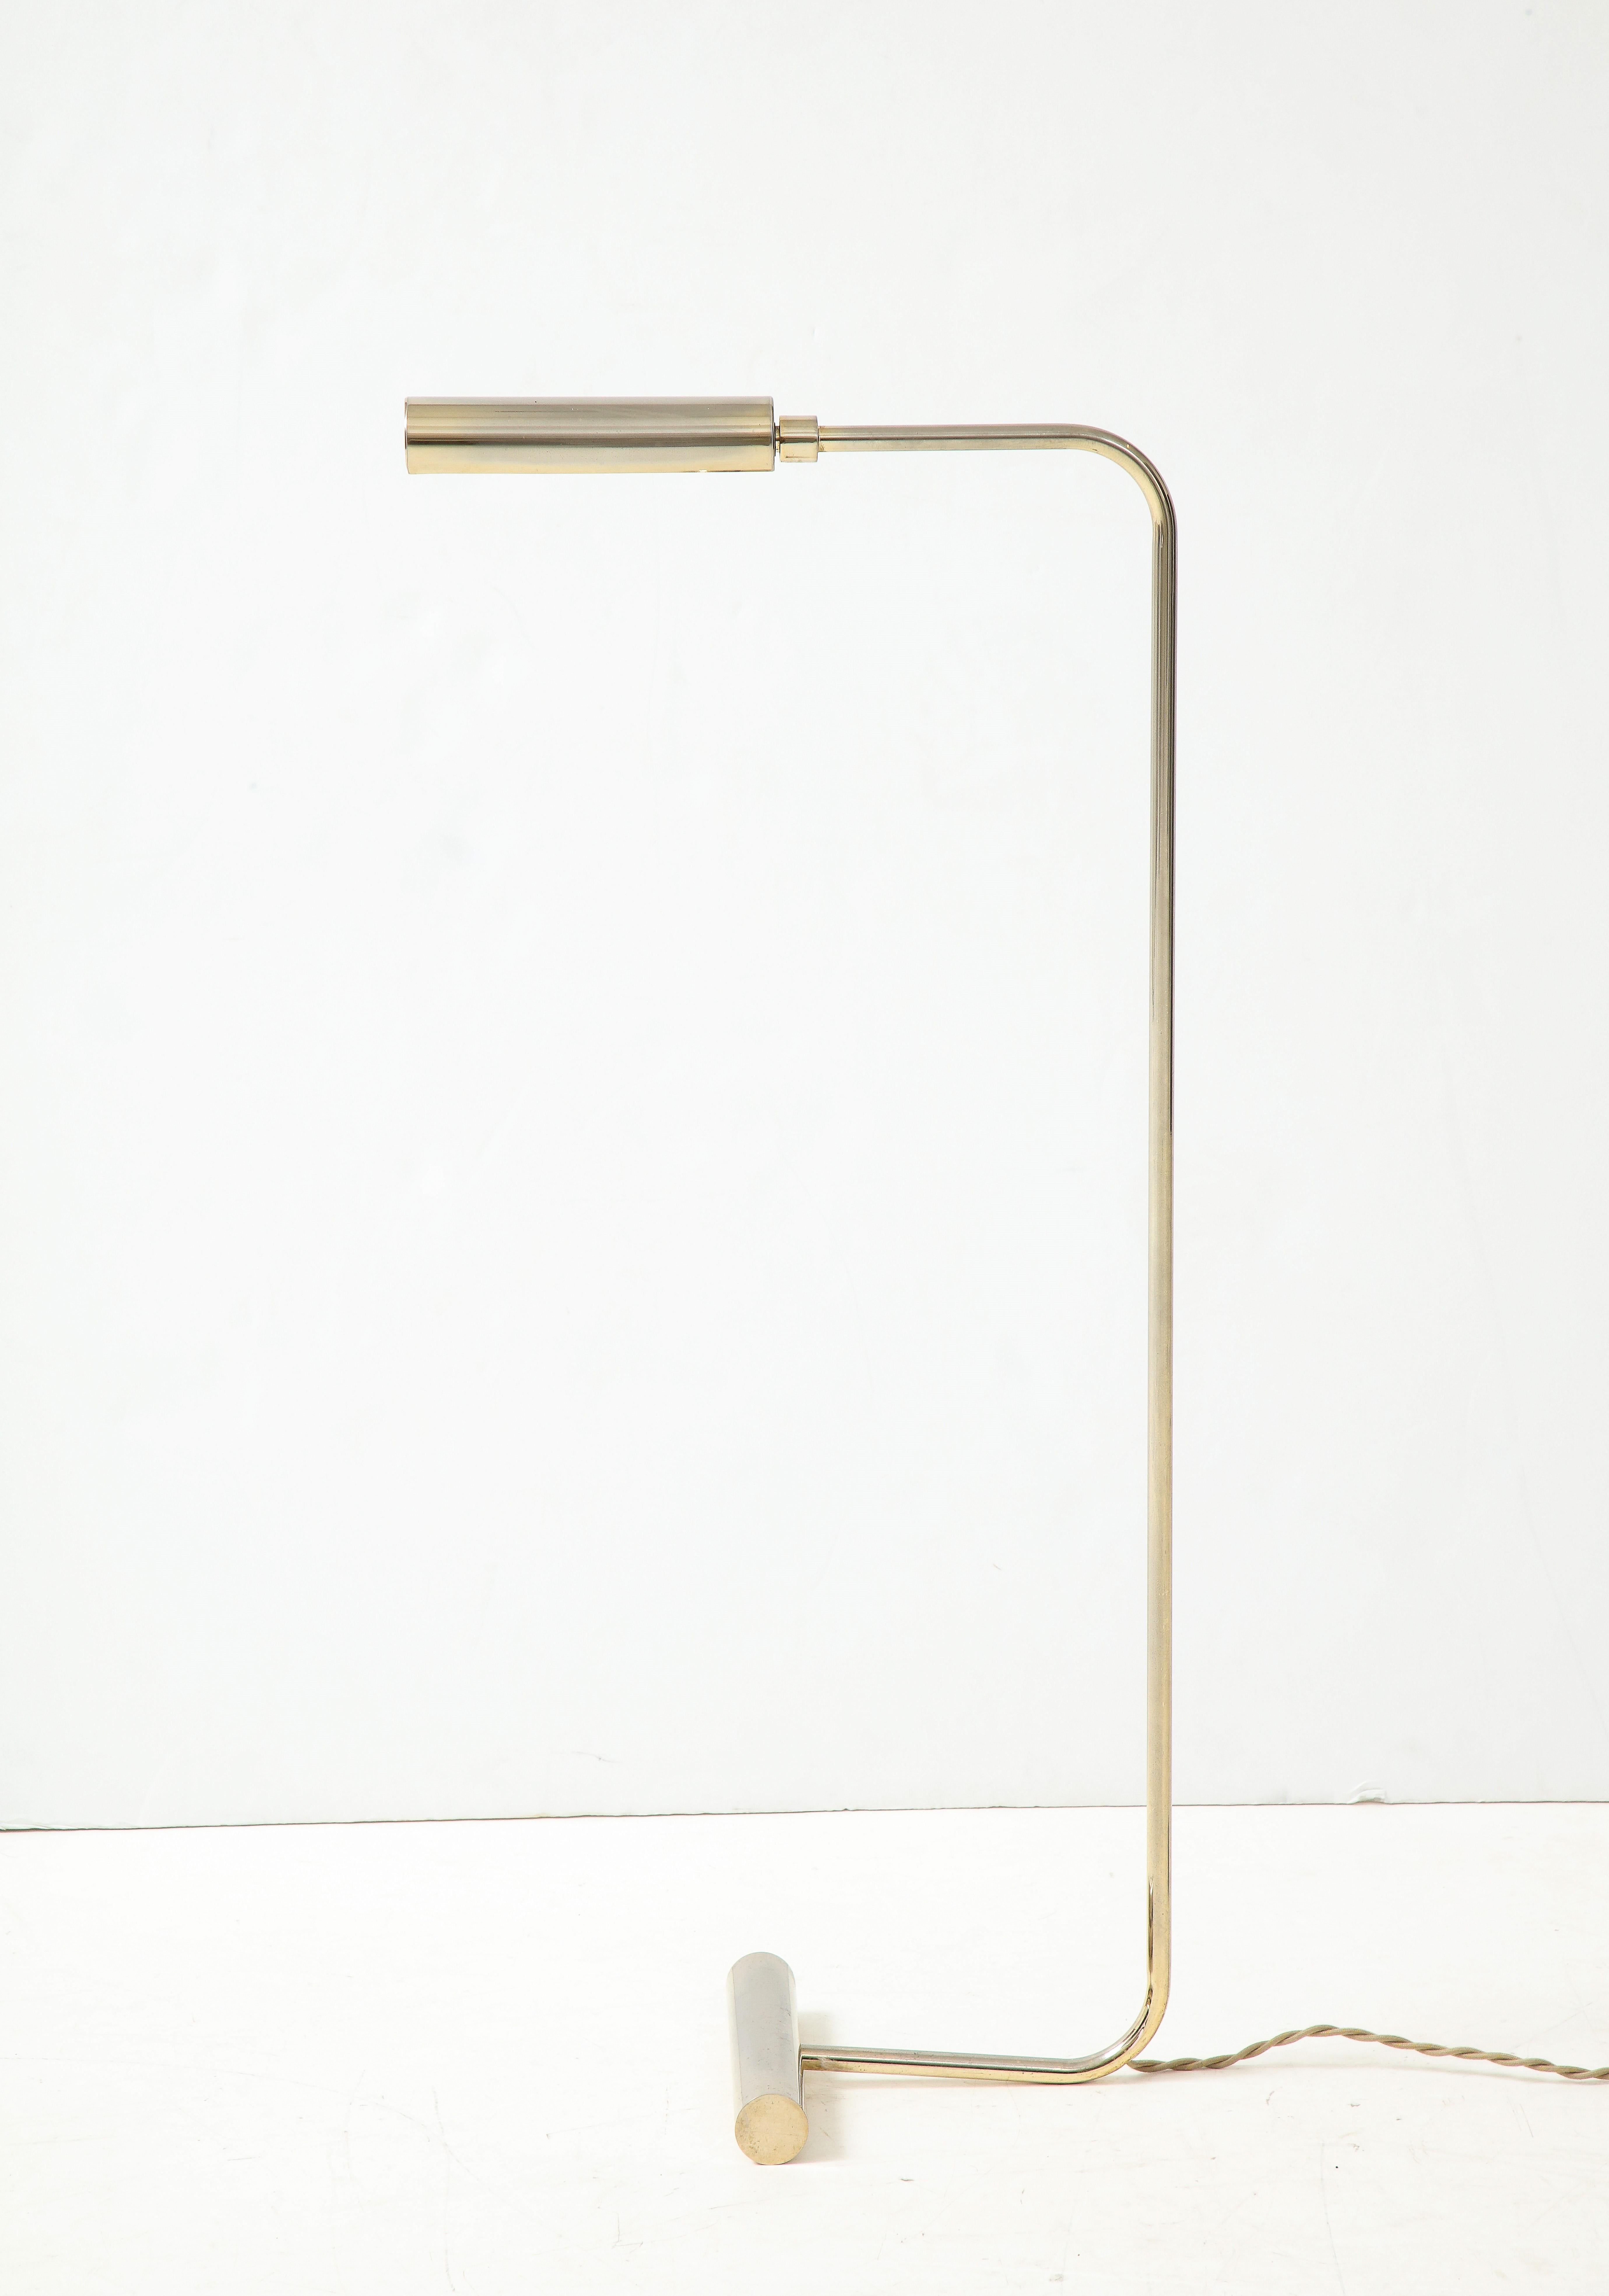 Iconic reading lamp by Christian Liaigre
nickel plated bronze
Gilt accent
Rewired for use in the US ; use of LED bulb recommended.